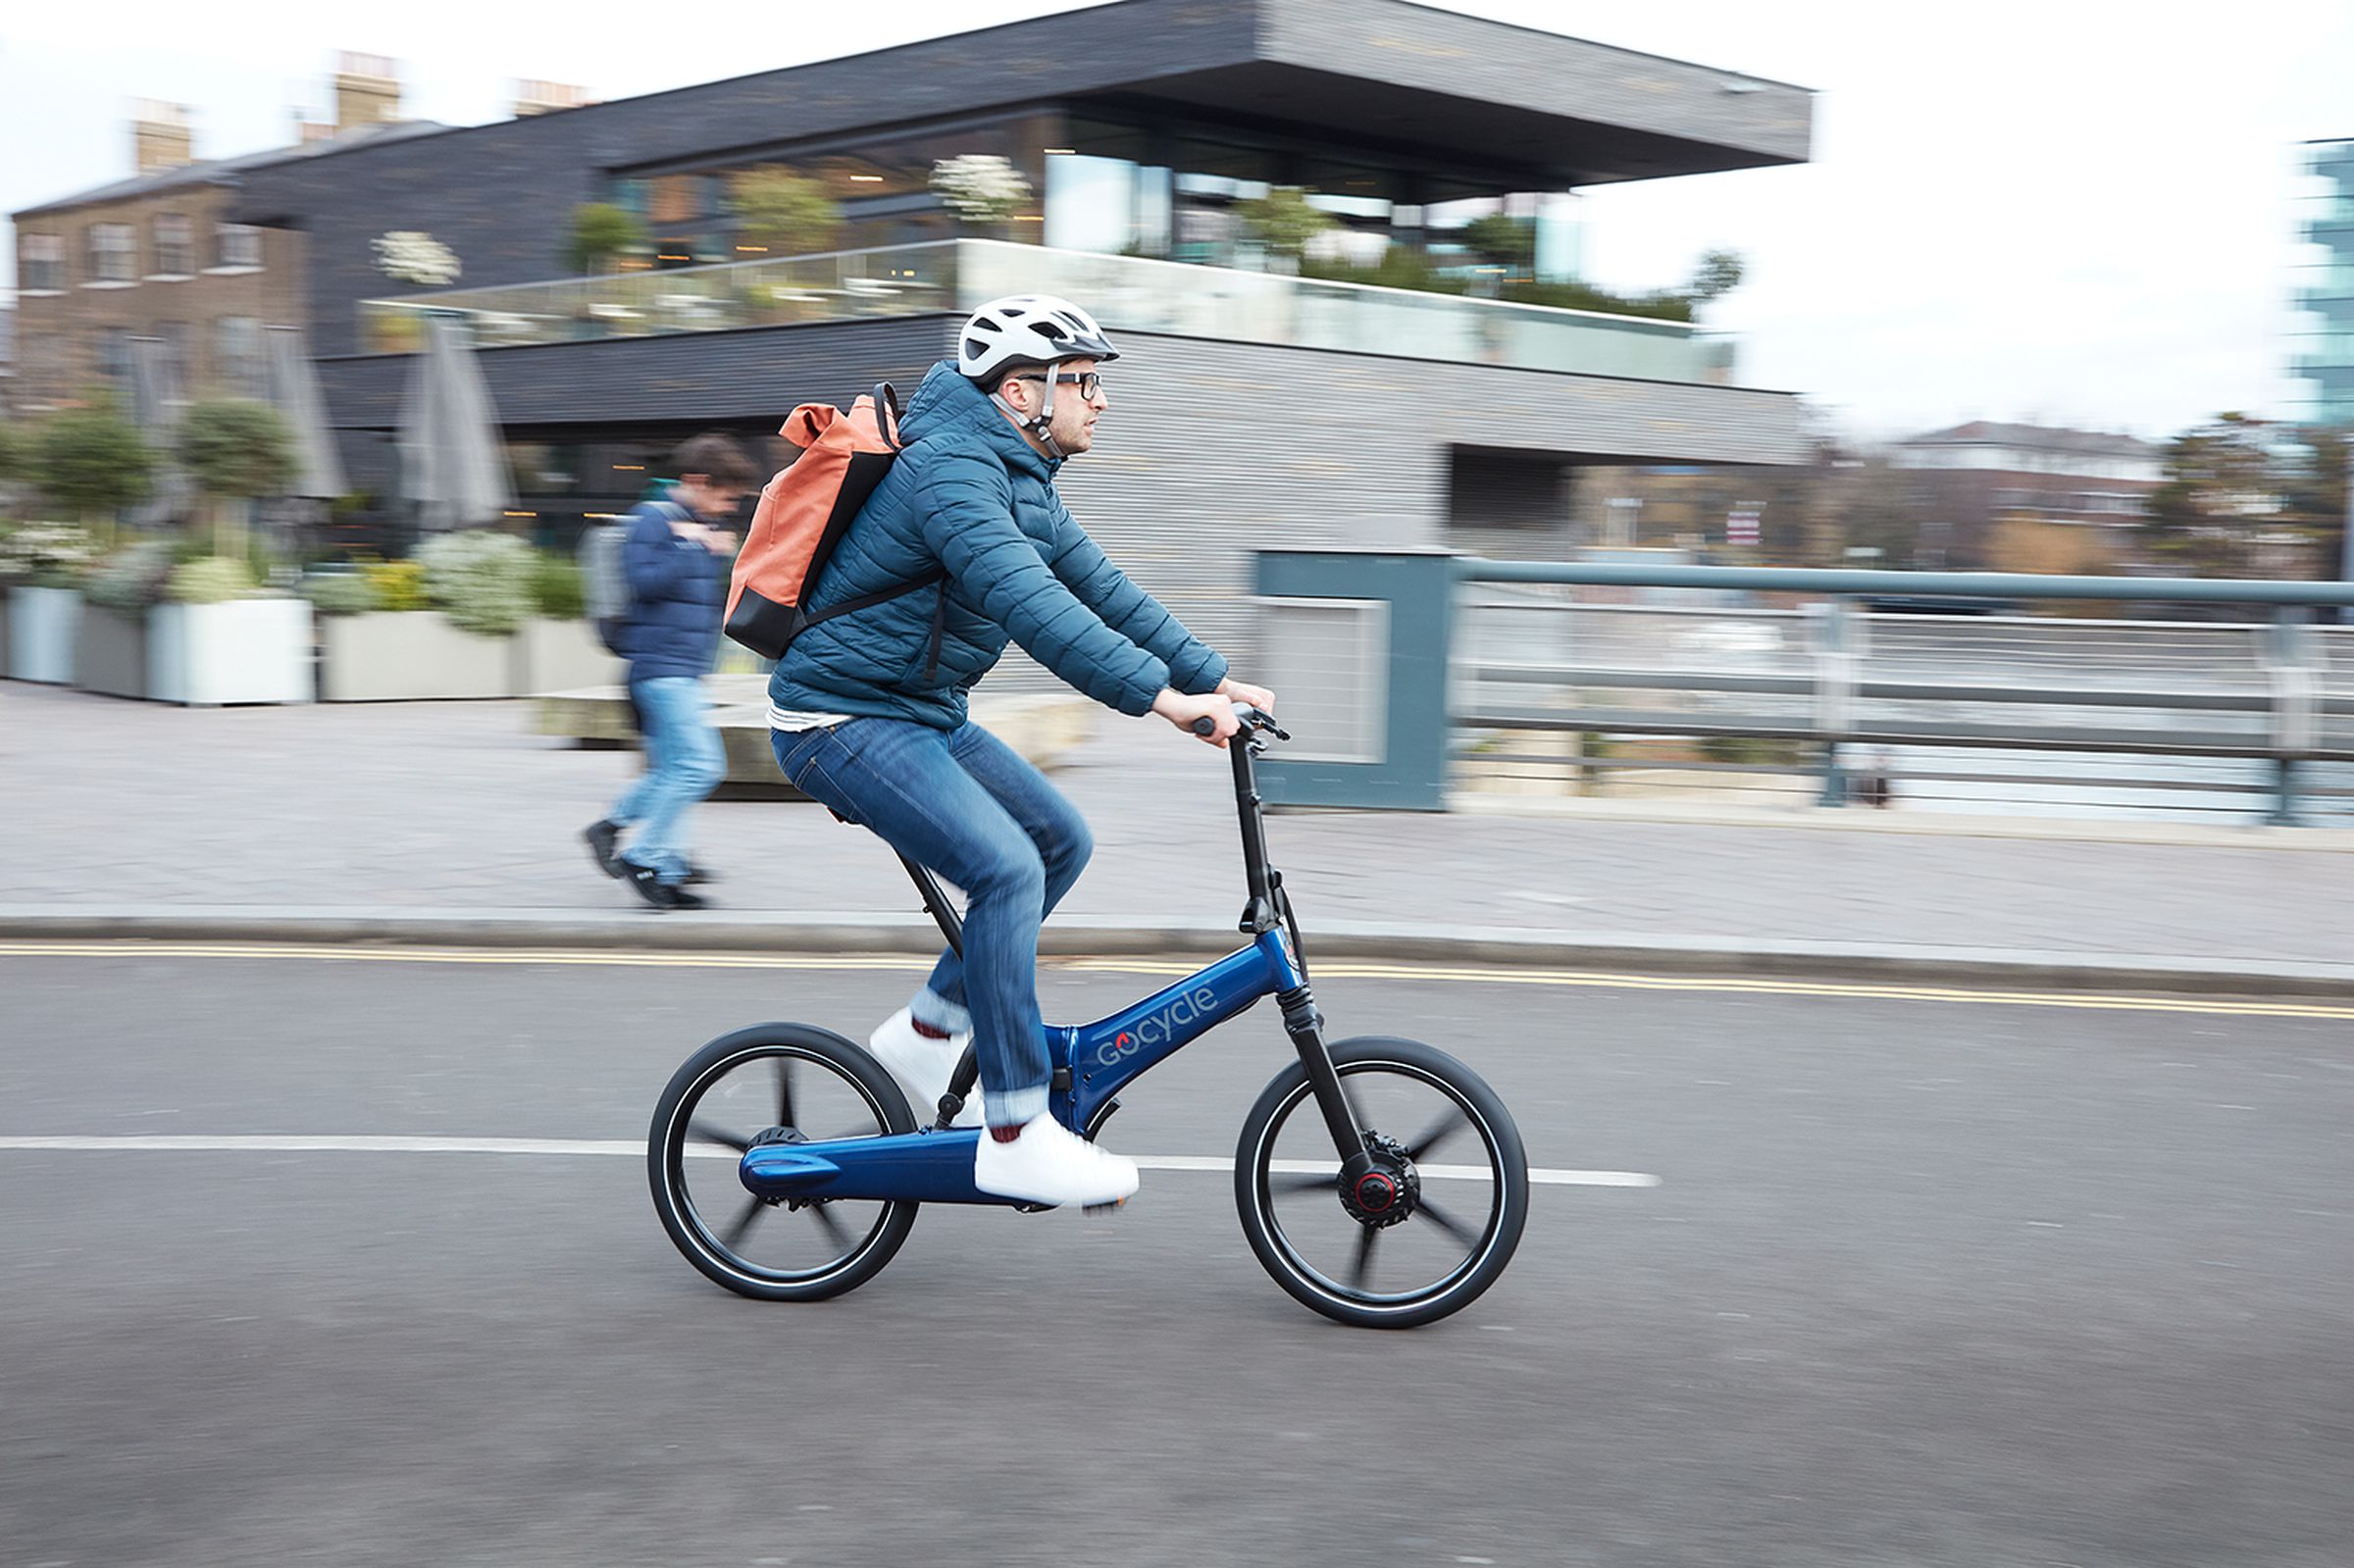 Sales of the Gocycle GX e-bike are up 65 percent.